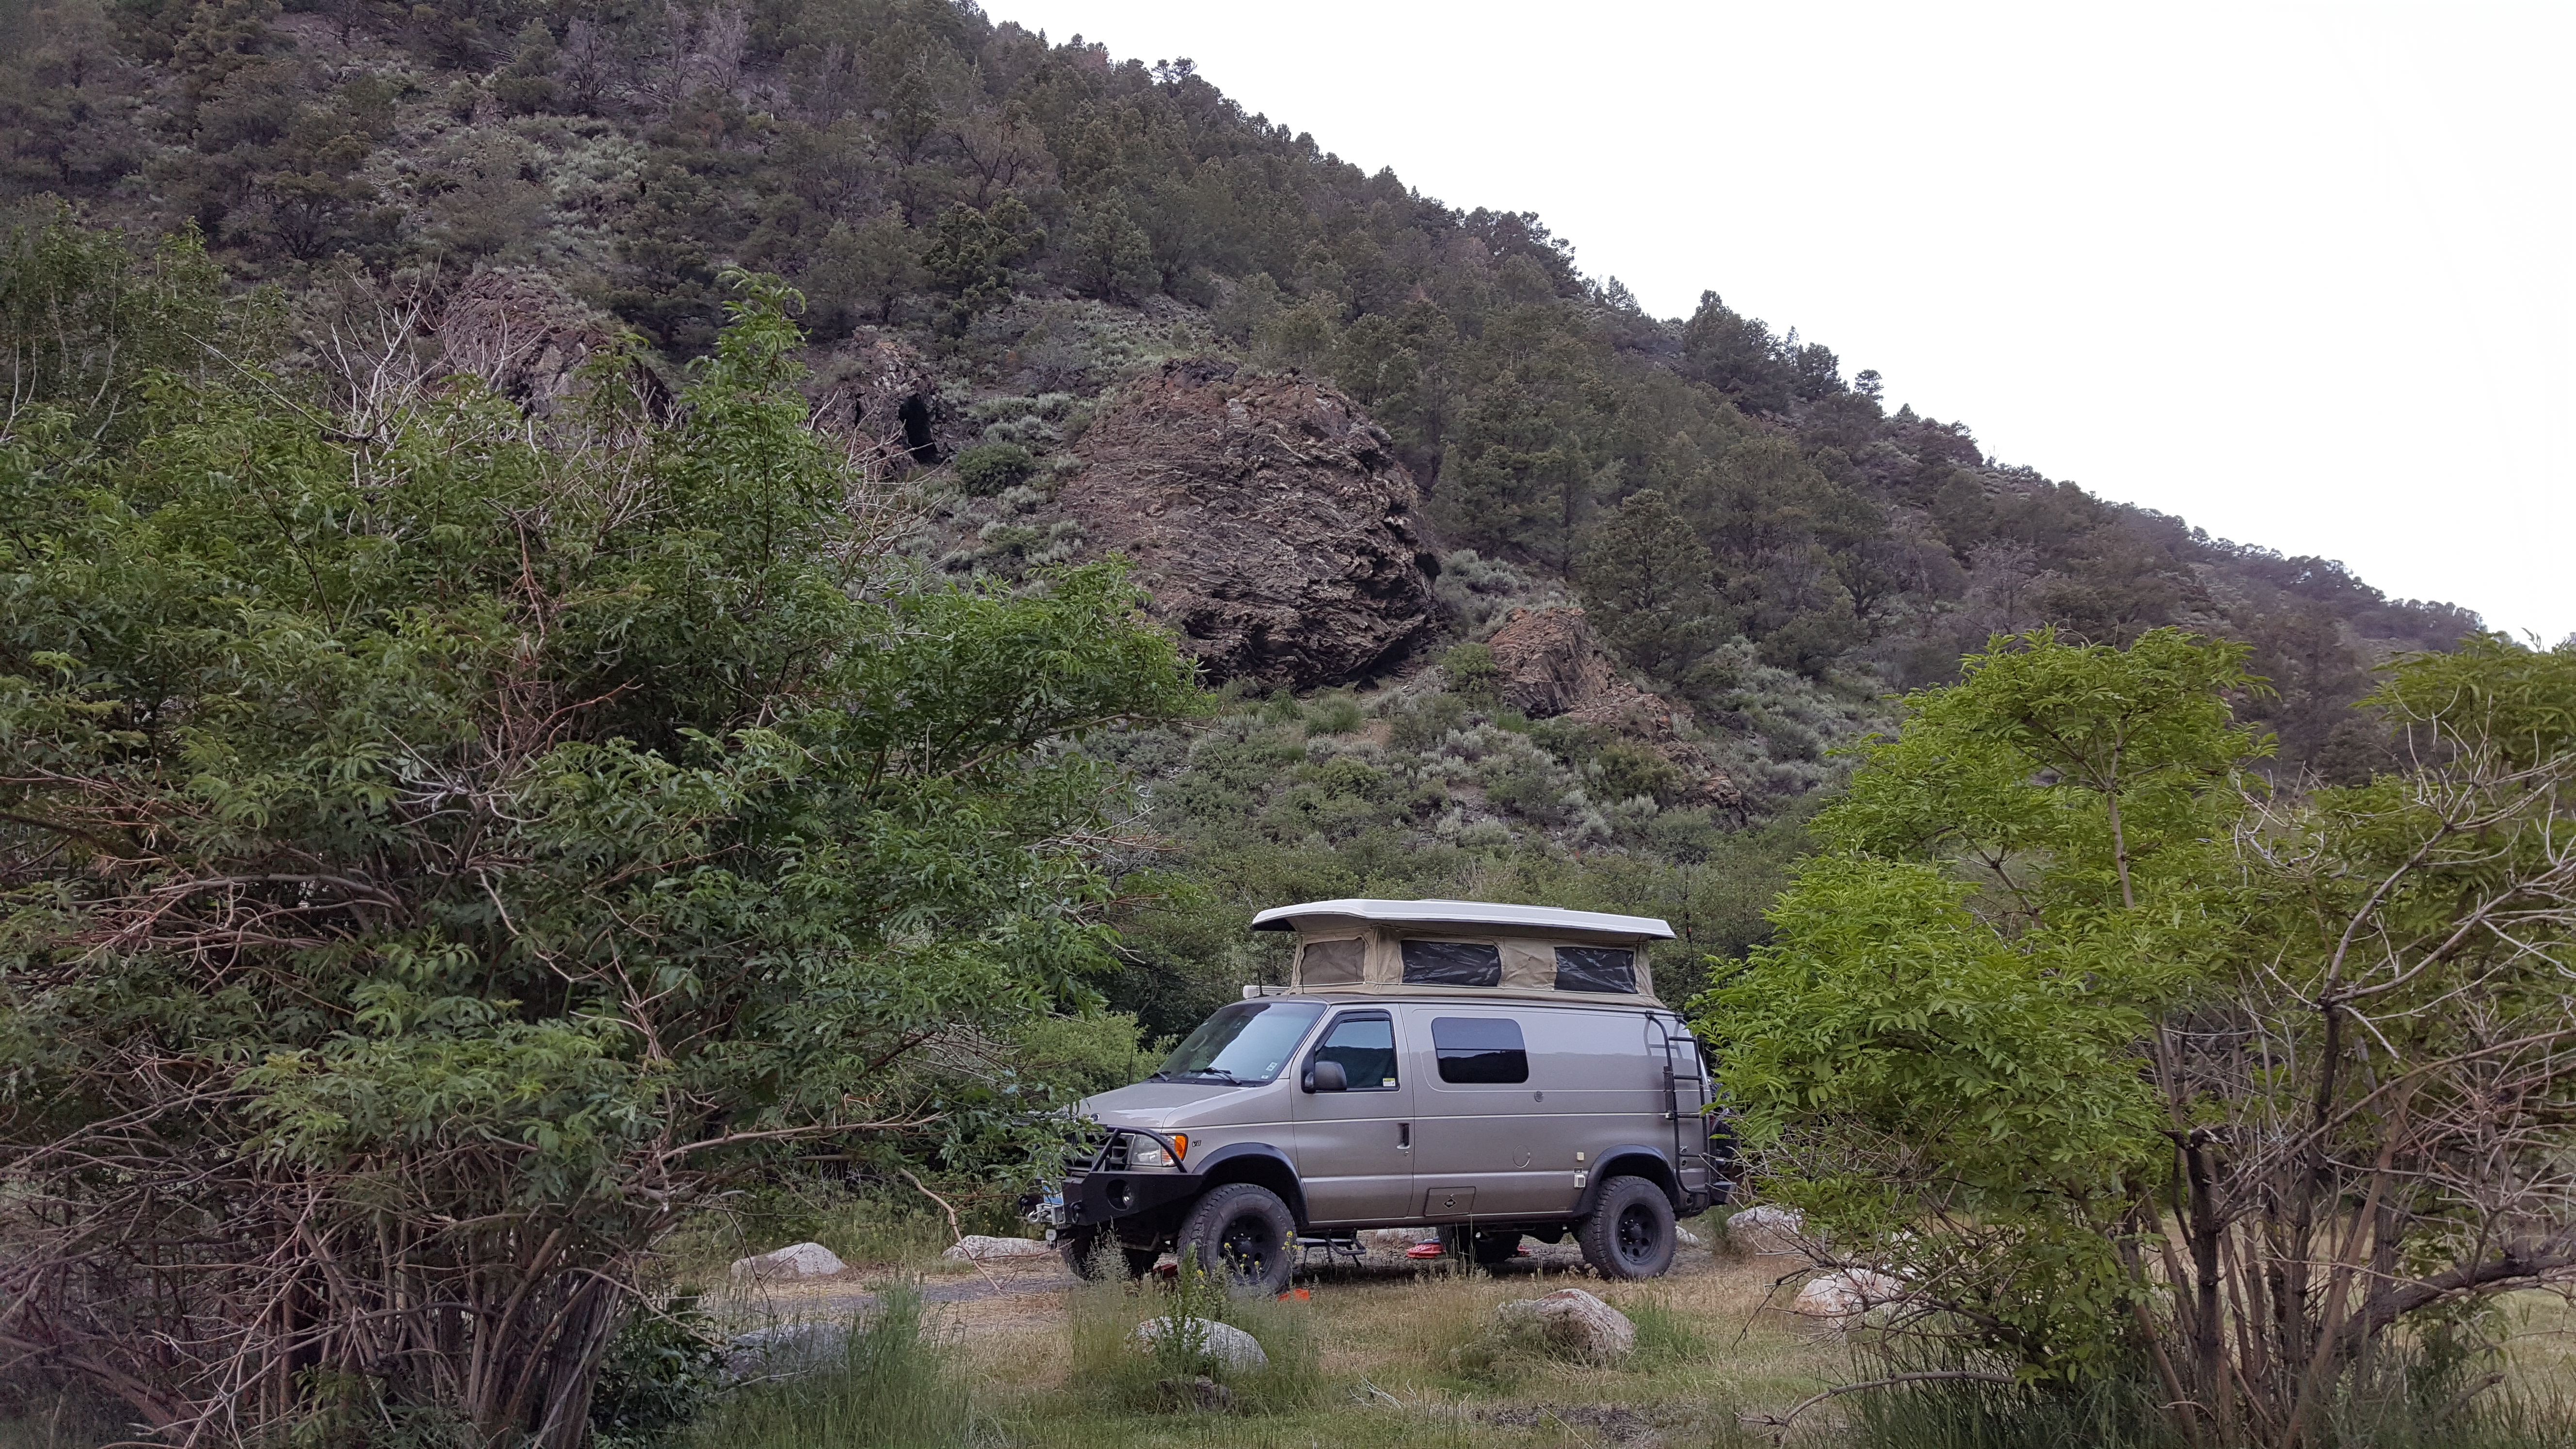 To get out of the dust storm I drove up Kingston Canyon to take refuge from the storm. Kingston Canyon turned out to be a gorgeous canyon and a great alternate route to Austin, Nevada